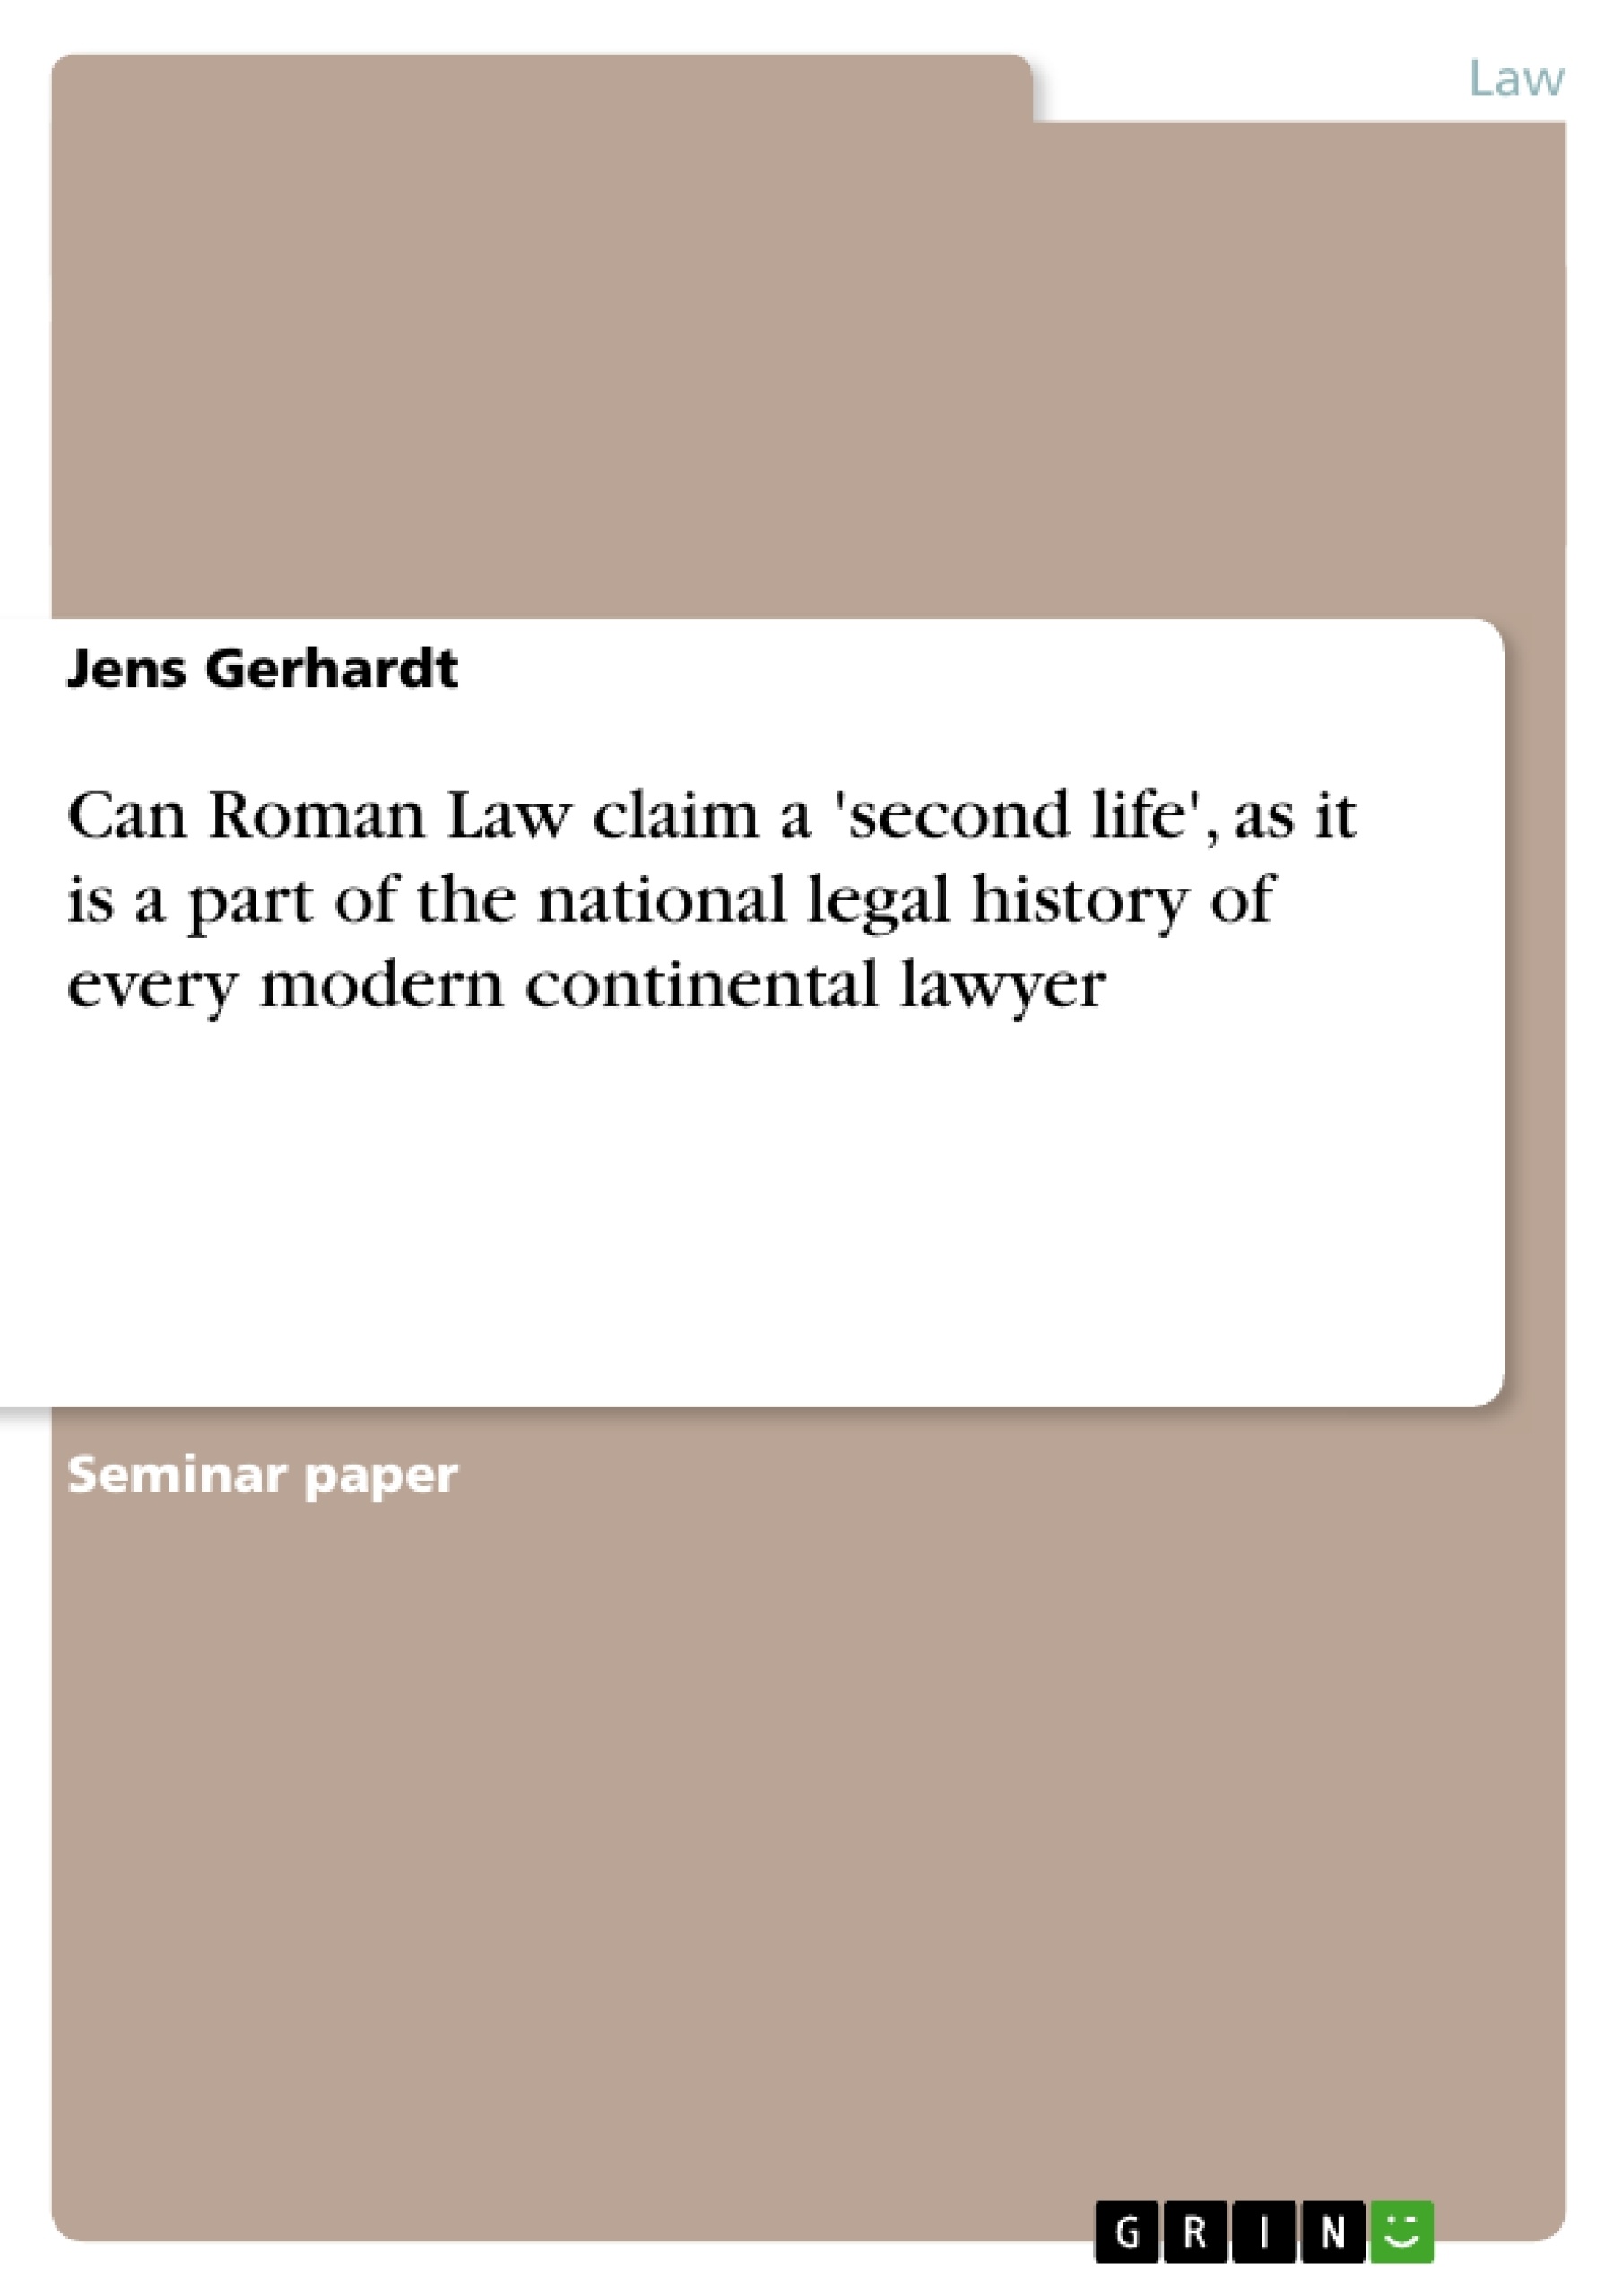 Titre: Can Roman Law claim a 'second life', as it is a part of the national legal history of every modern continental lawyer